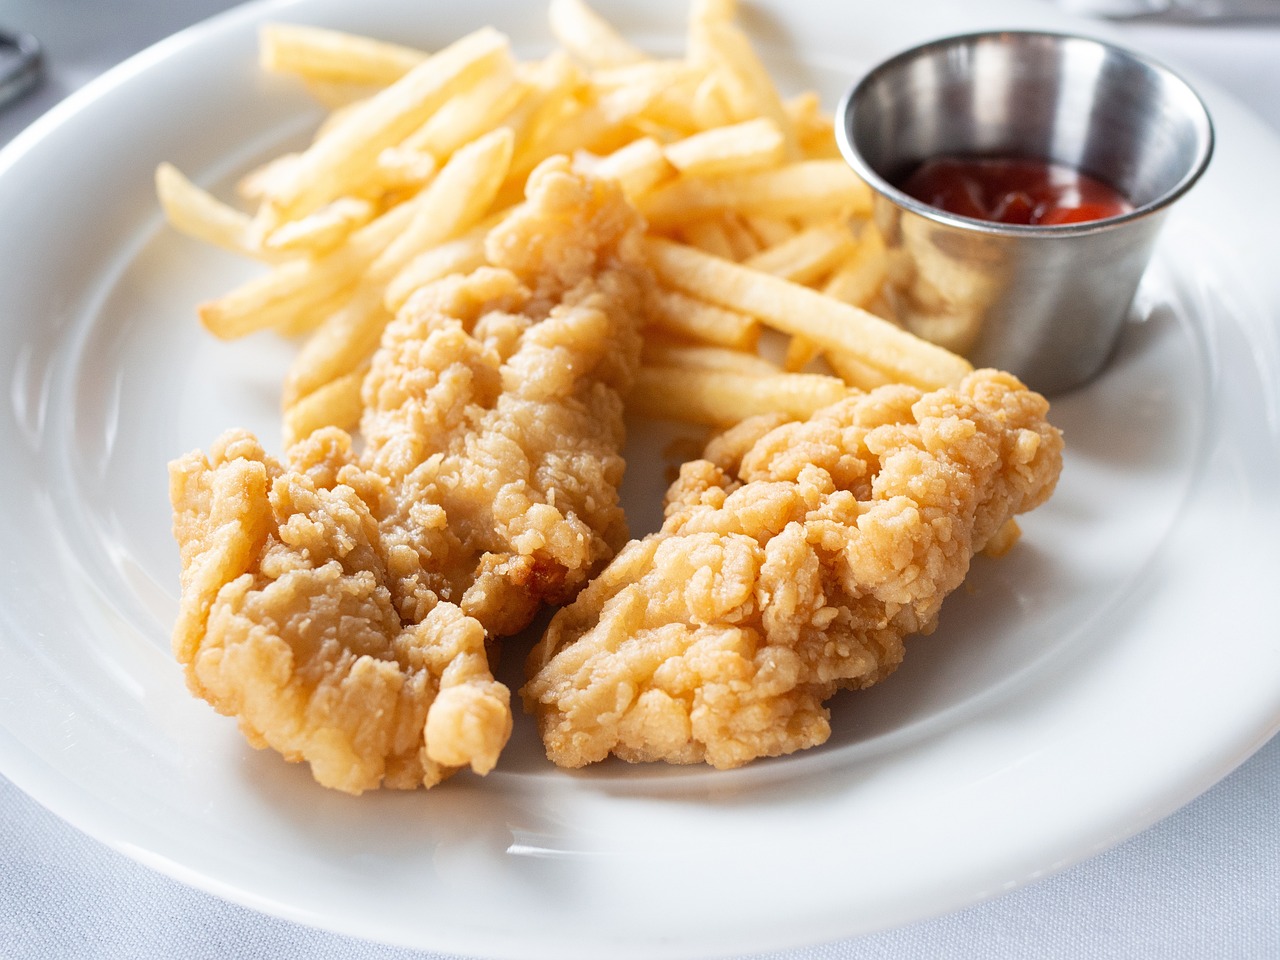 A small plate of chicken tenders and fries